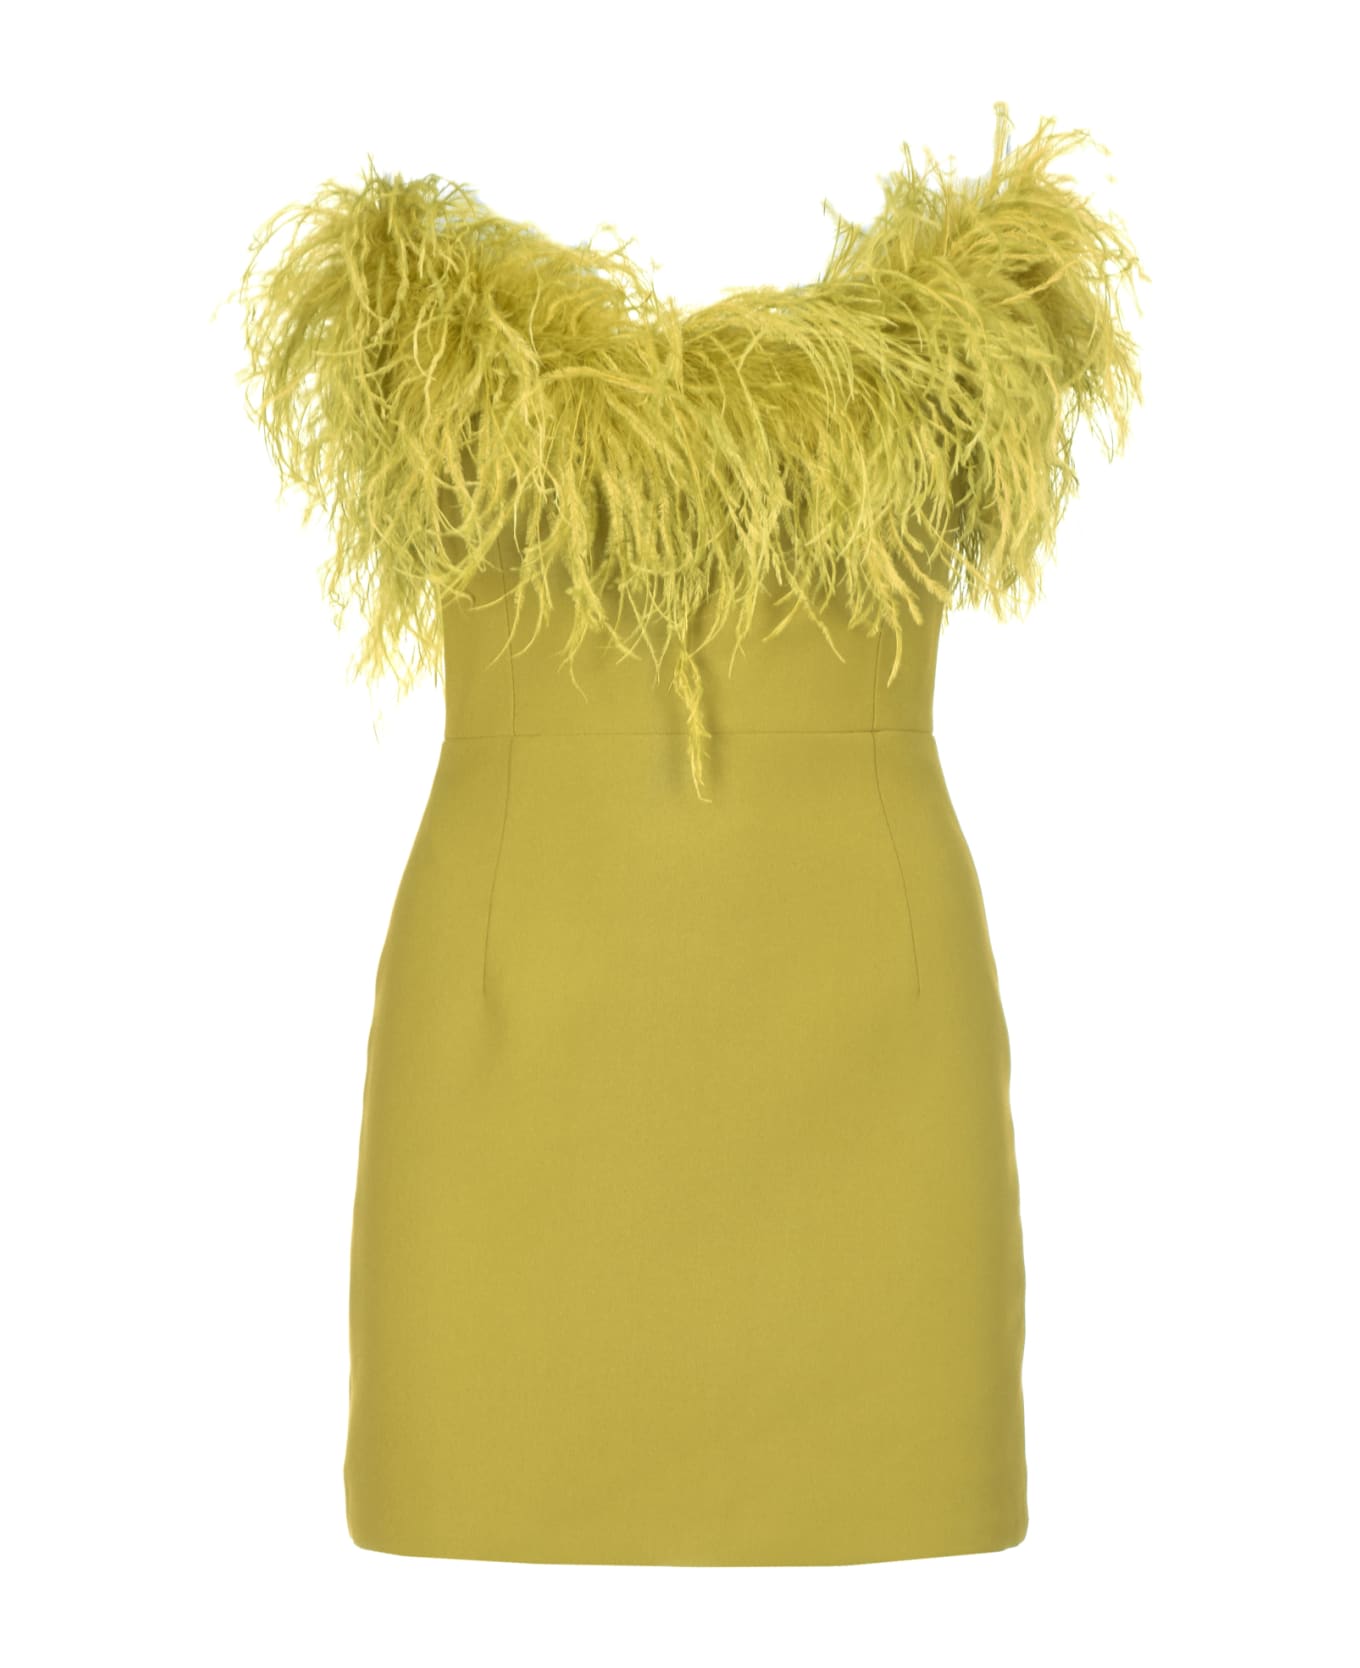 NEW ARRIVALS Short Dress With Feathers - Yellow